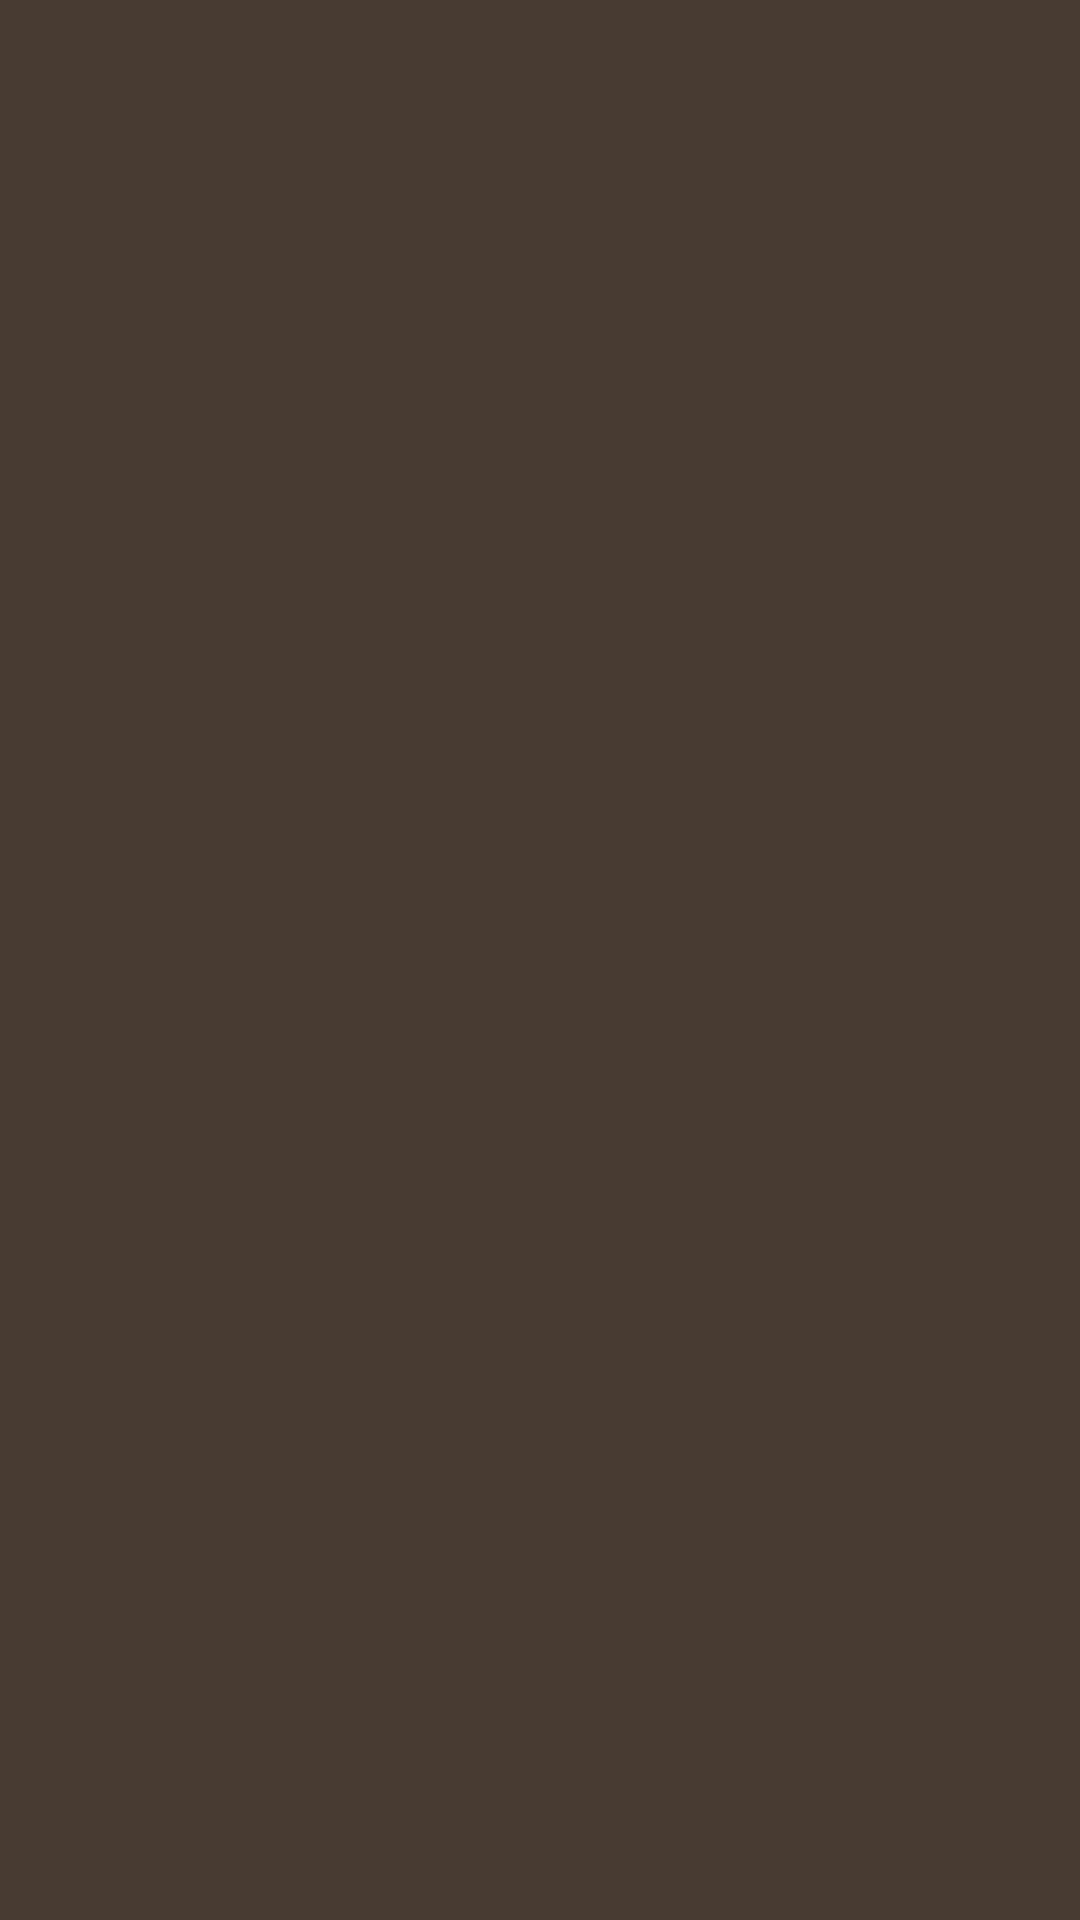 1080x1920 Taupe Solid Color Background